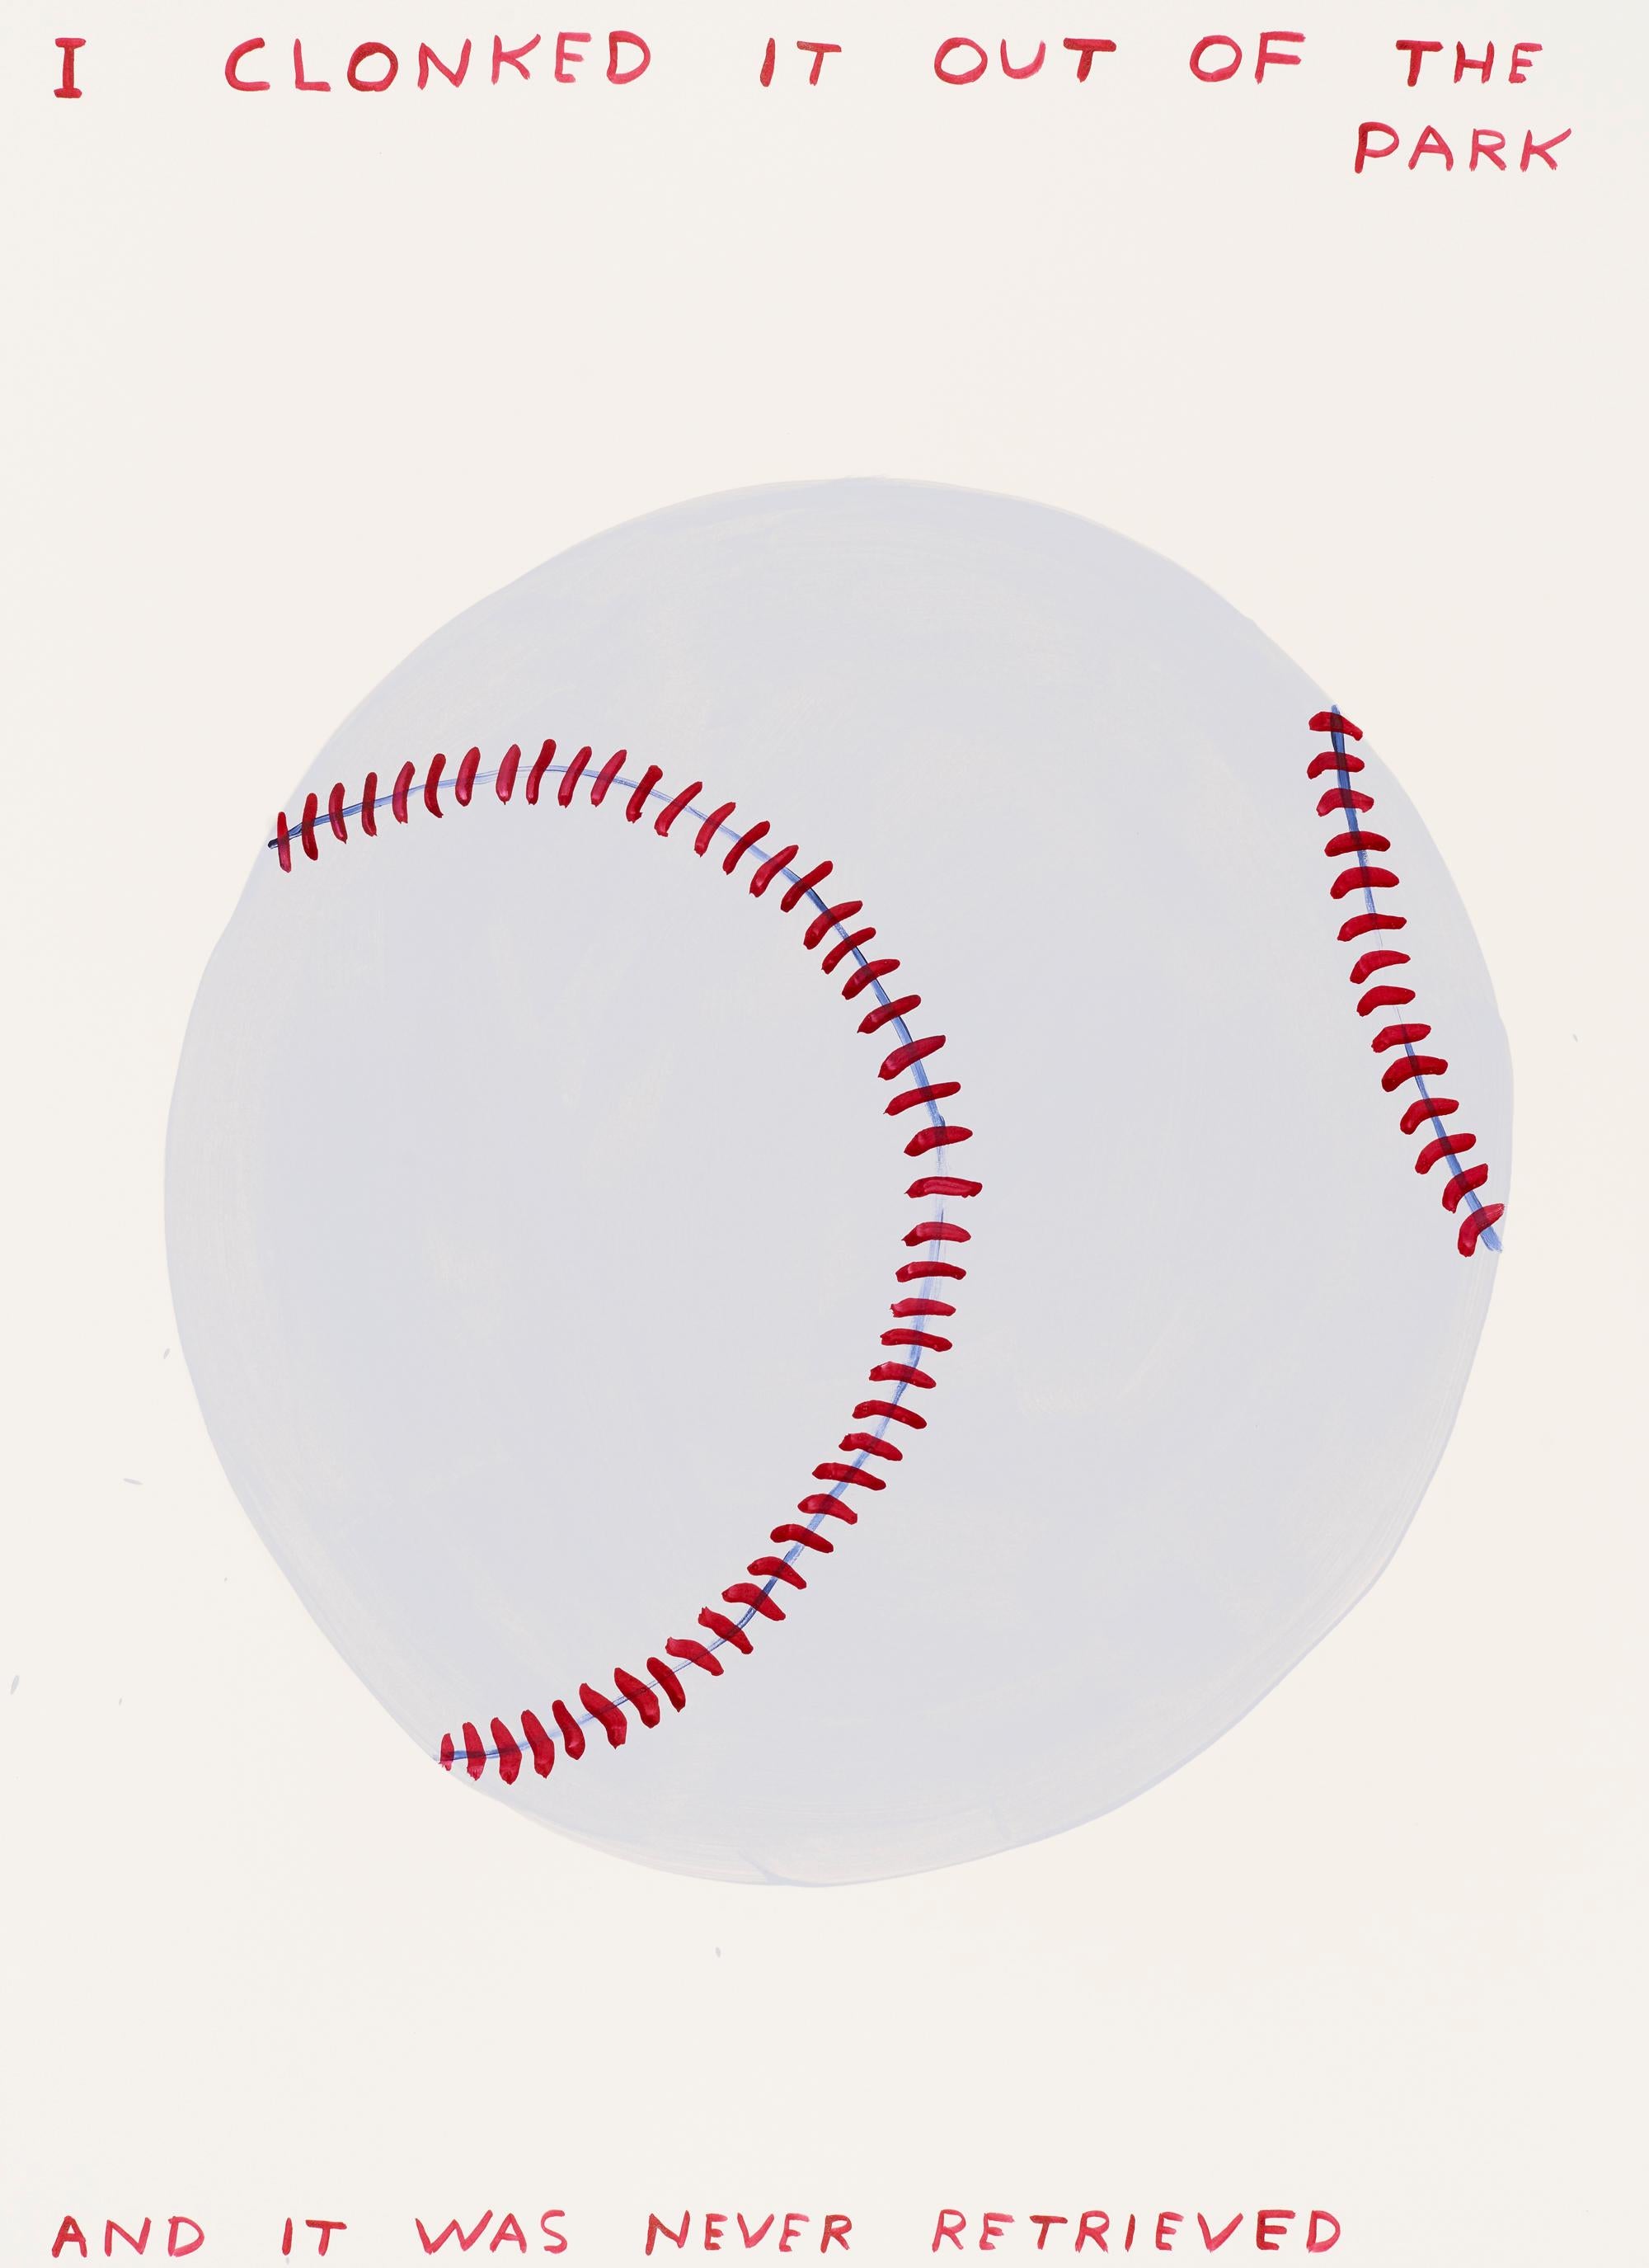 David Shrigley Figurative Painting - Untitled (I Clonked it Out of the Park)